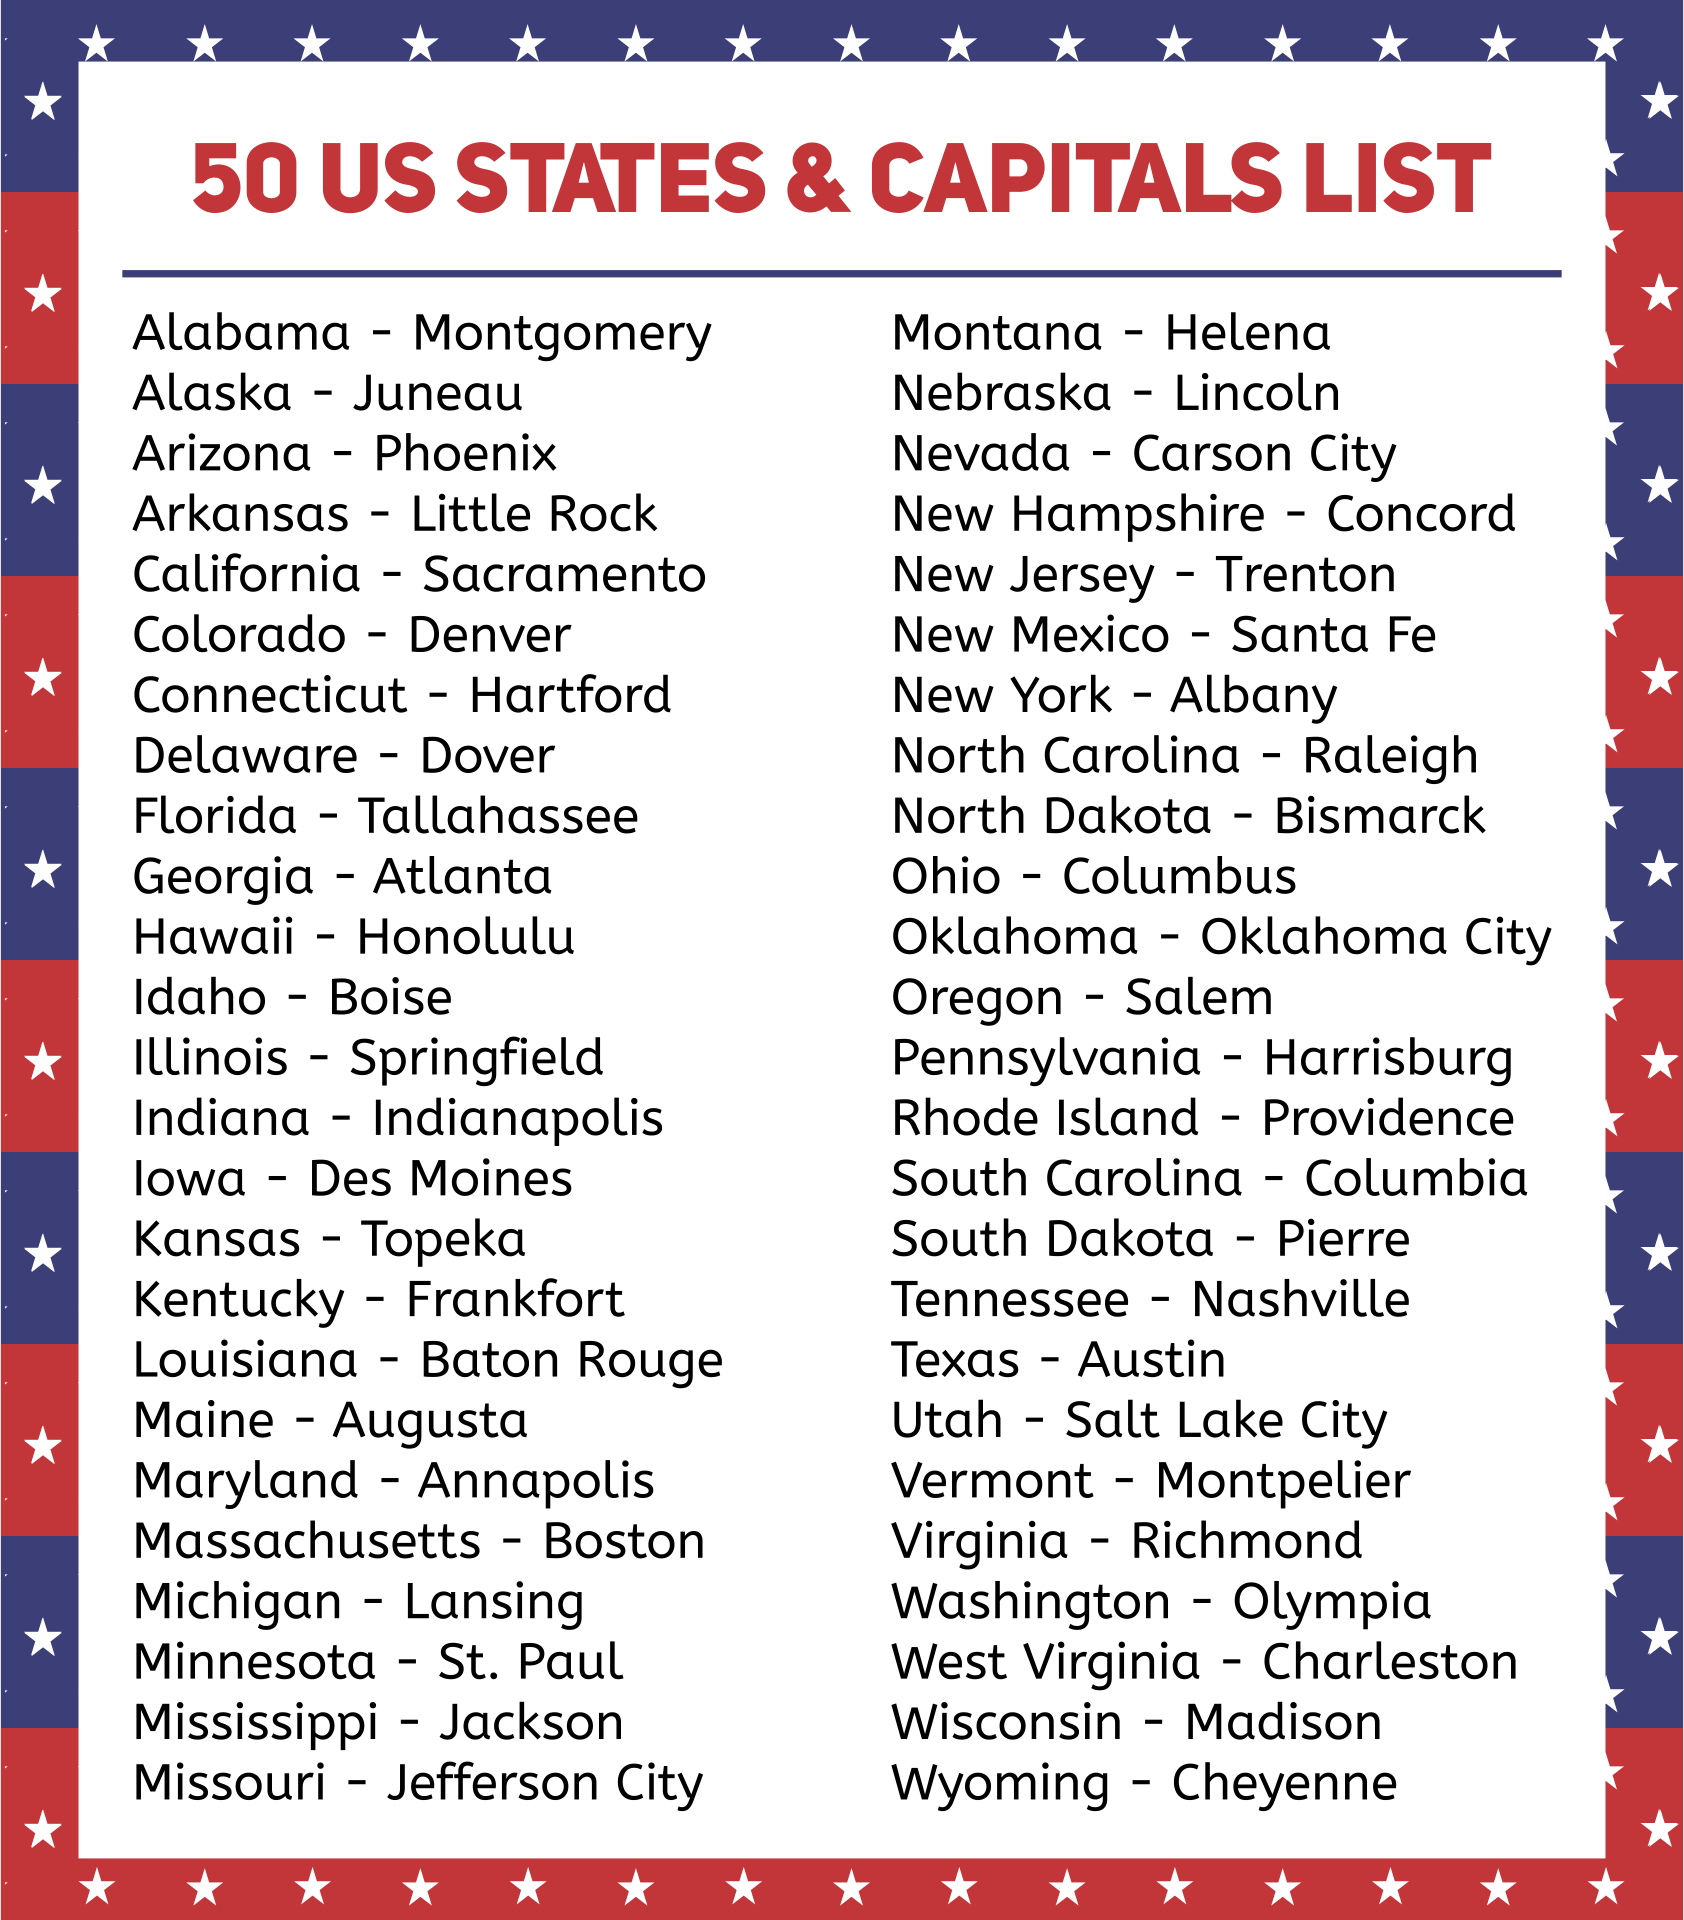 50-states-and-capitals-list-free-printable-states-and-capitals-images